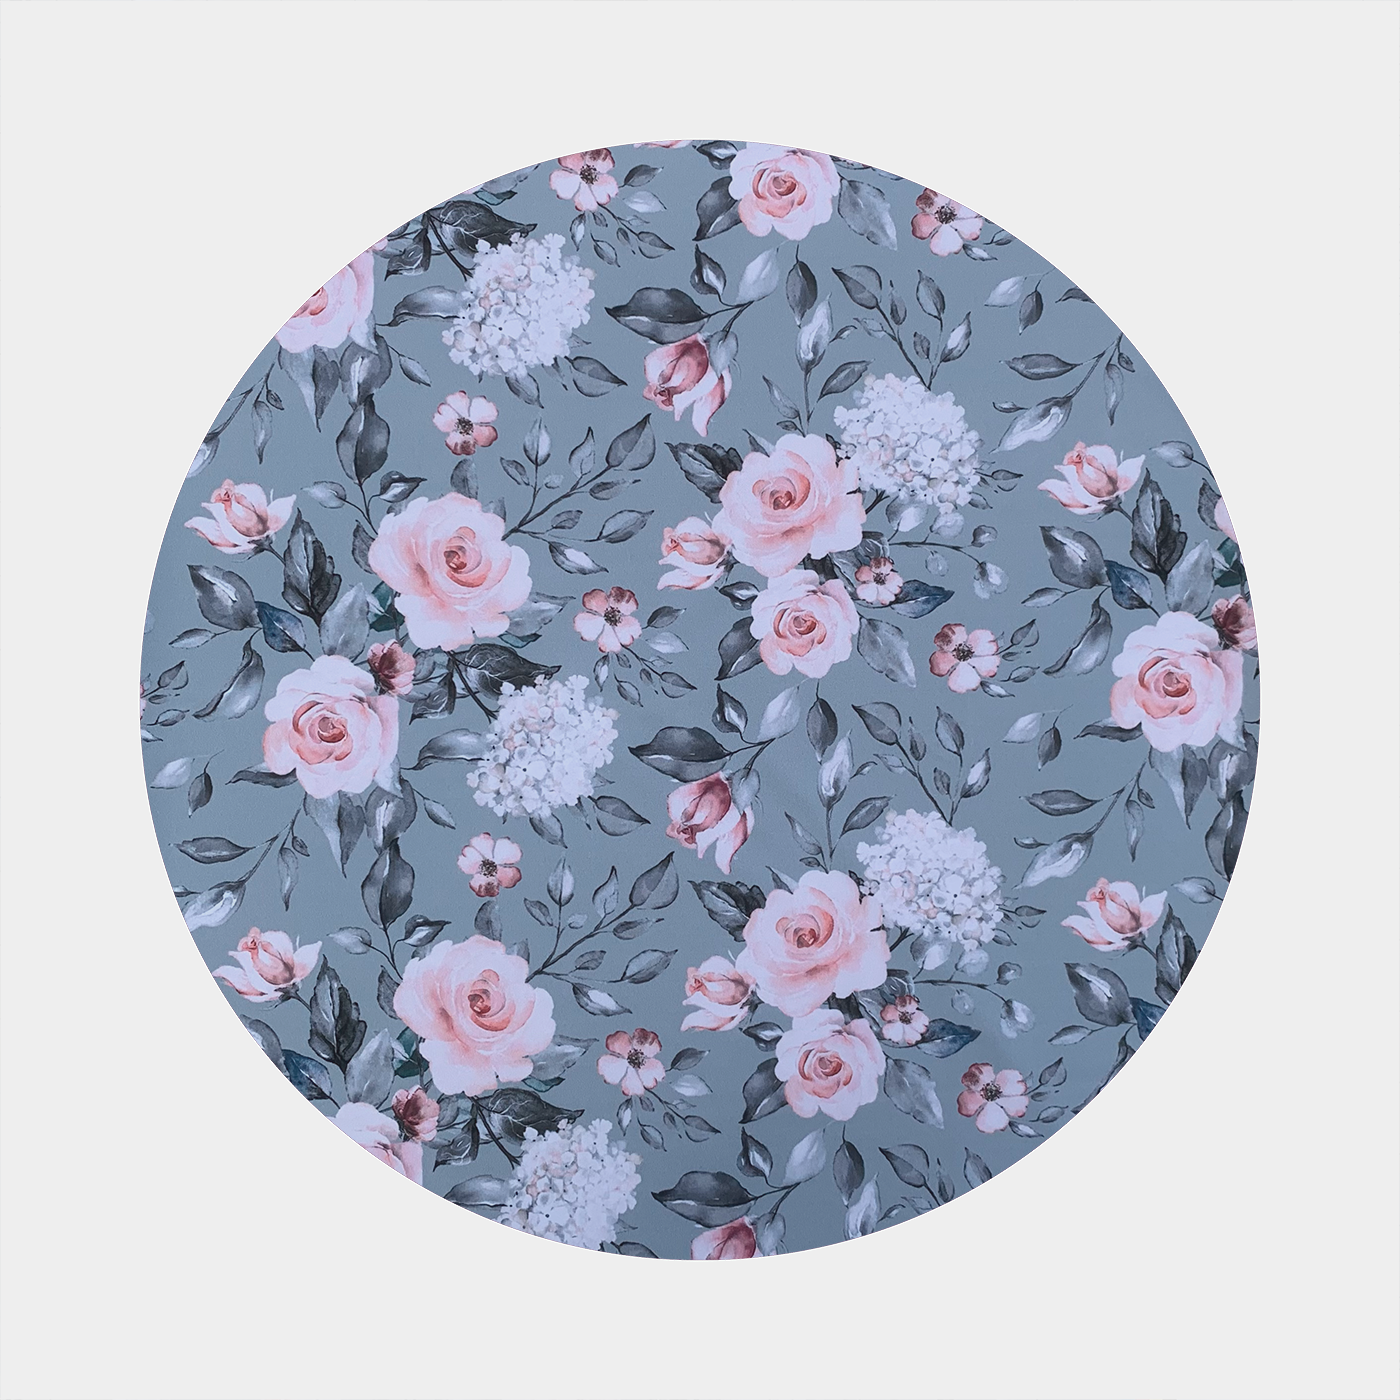 Floral pattern with grey background and pink and white flowers